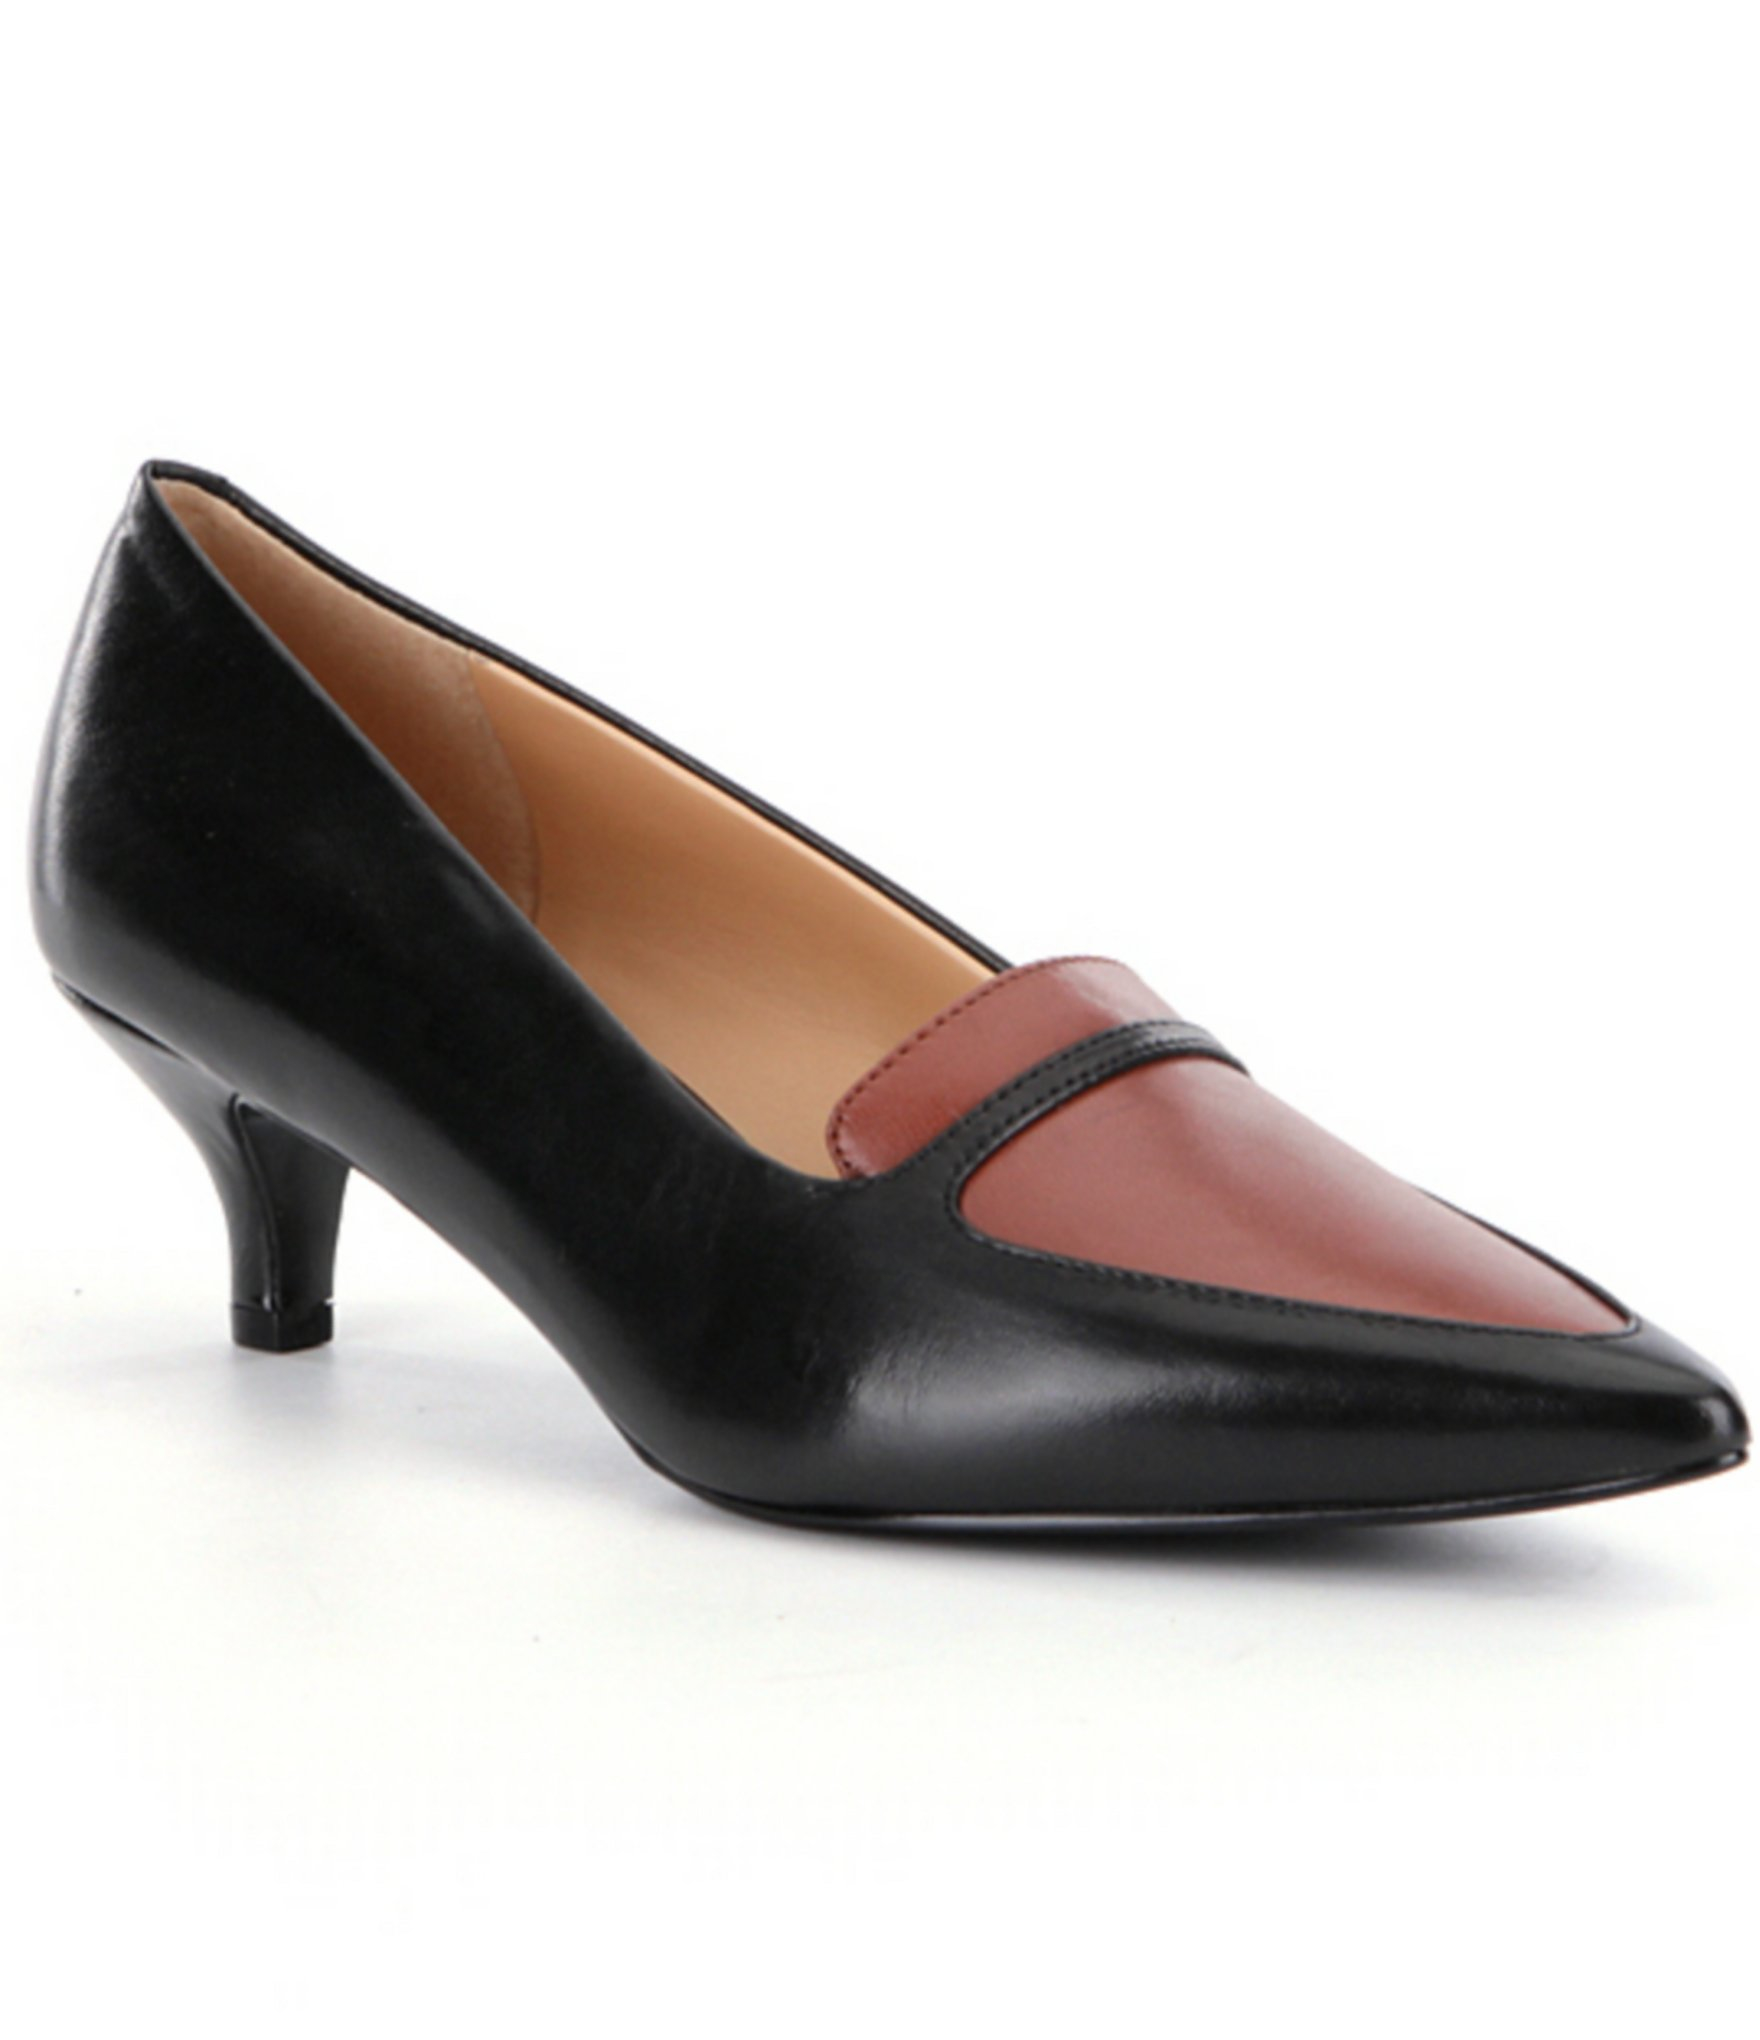 Lyst - Trotters Piper Pumps in Black